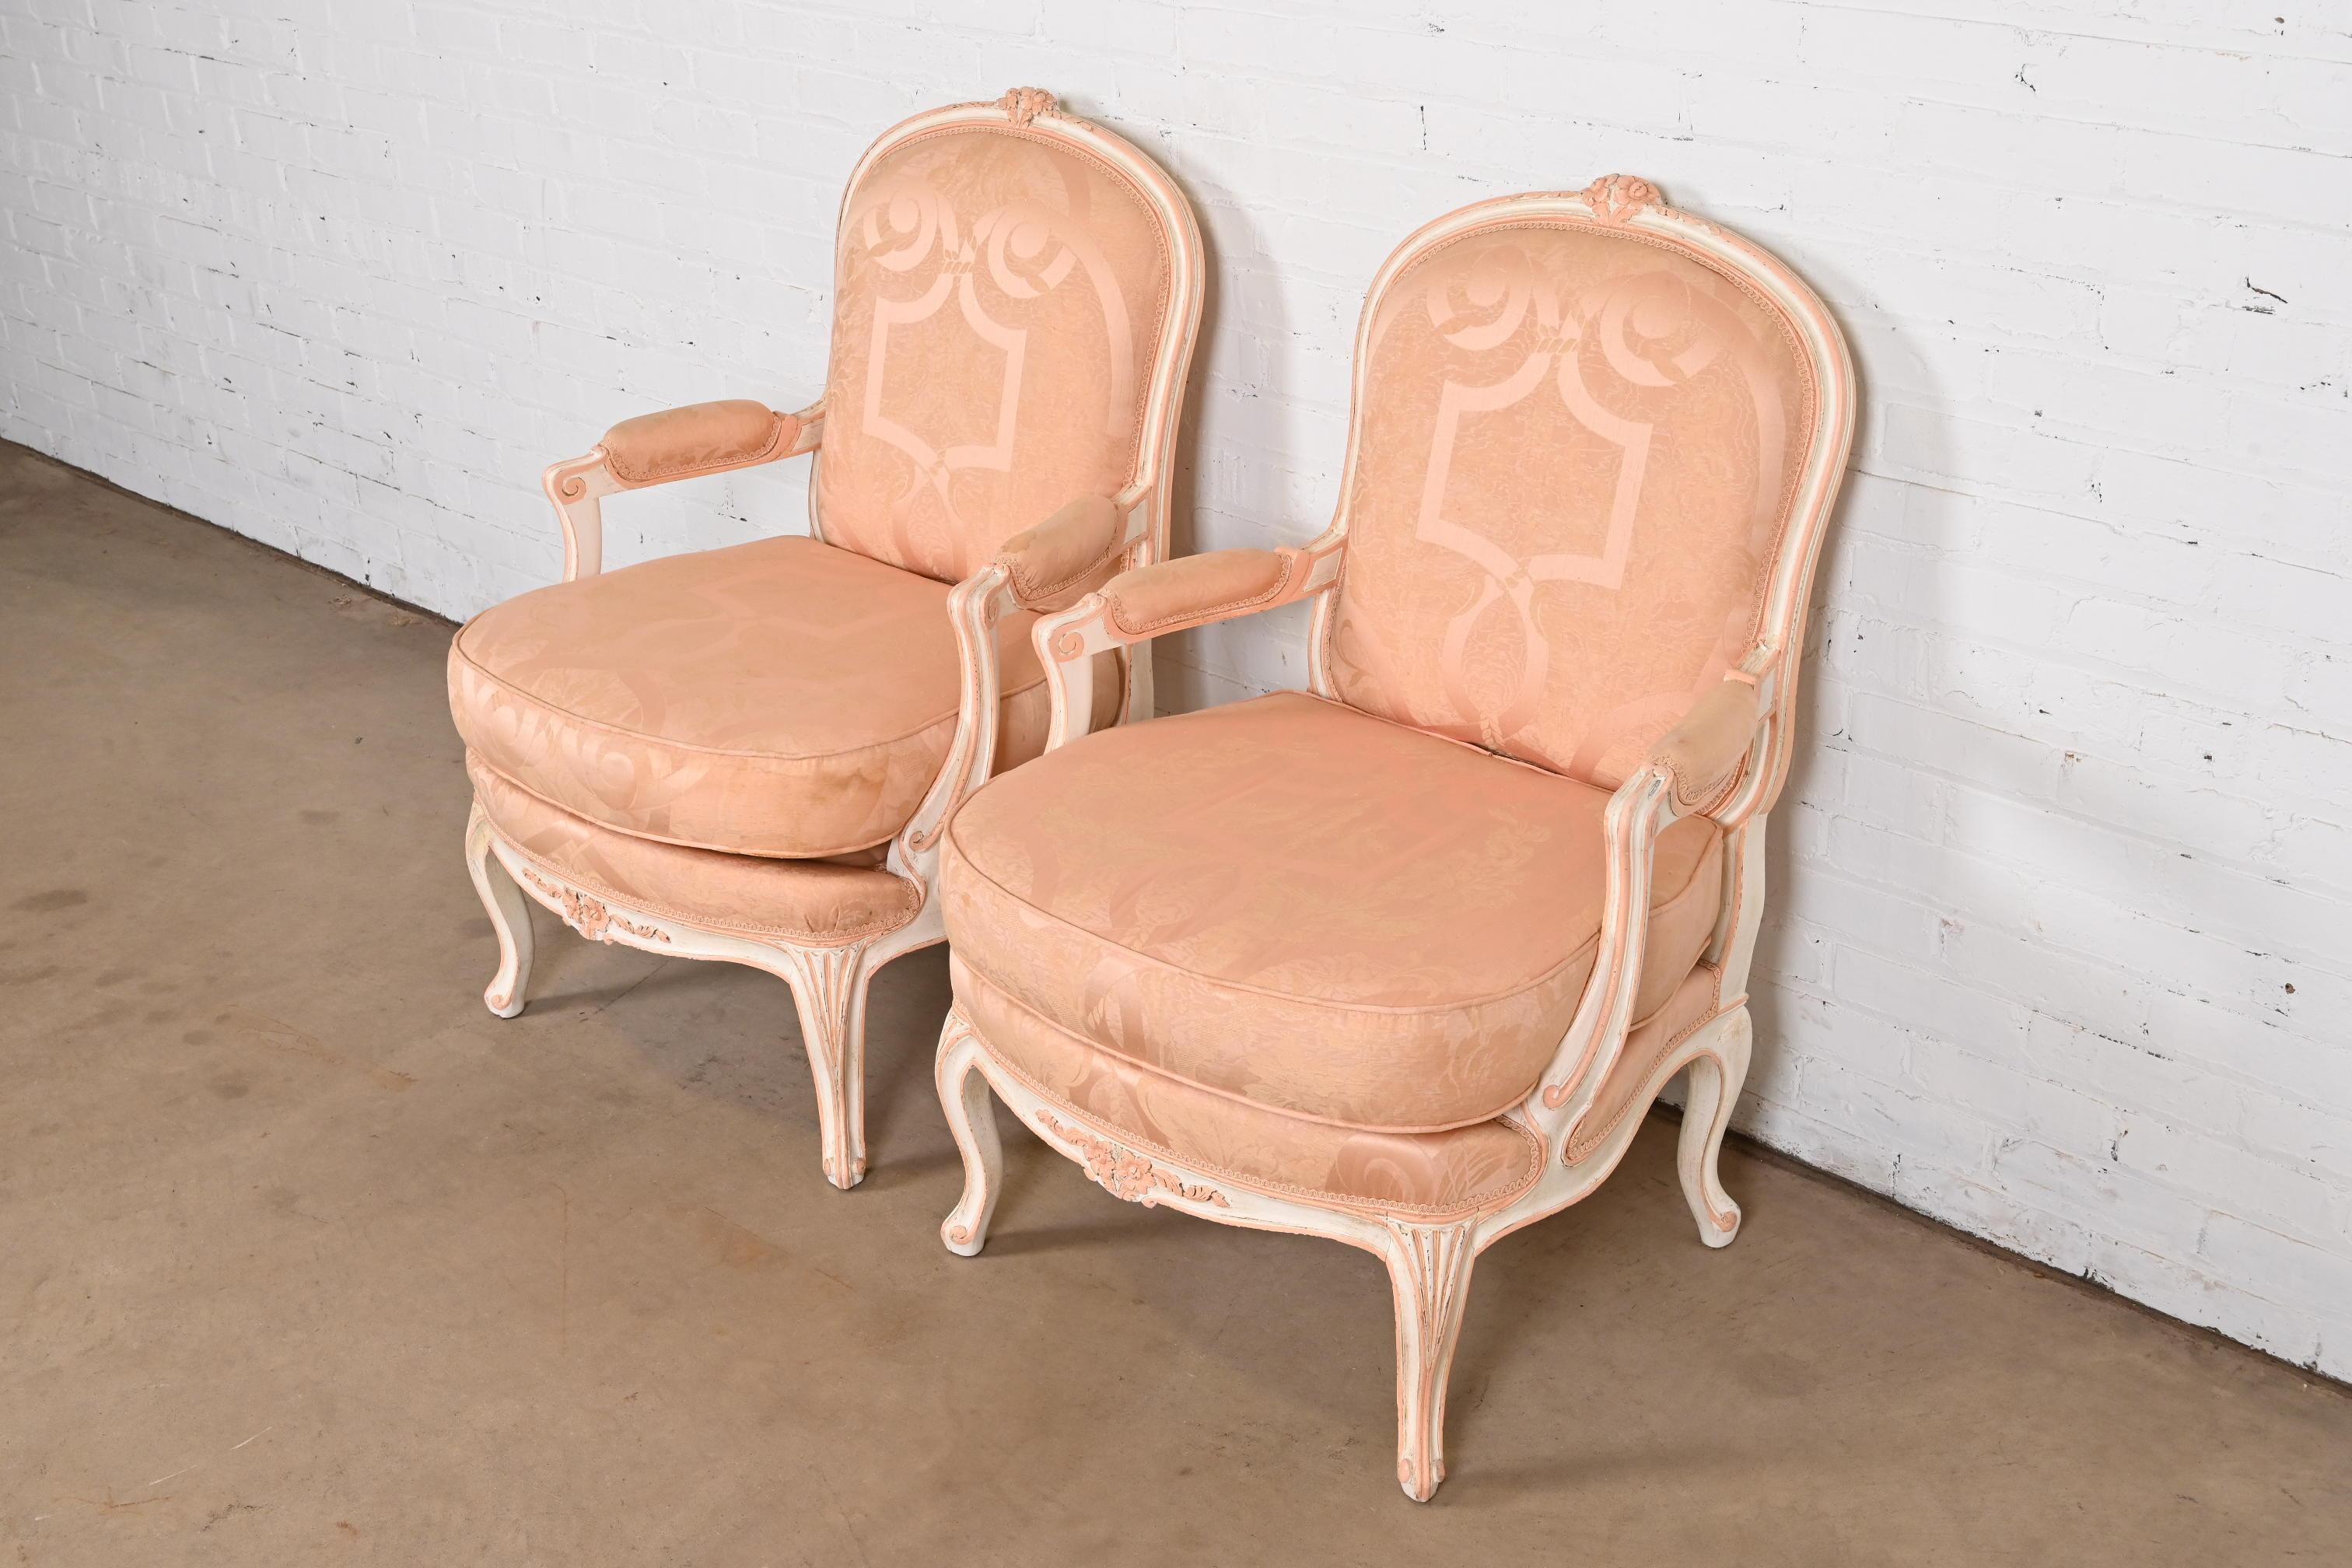 Upholstery French Provincial Louis XV Carved Painted Walnut Fauteuils, Pair For Sale